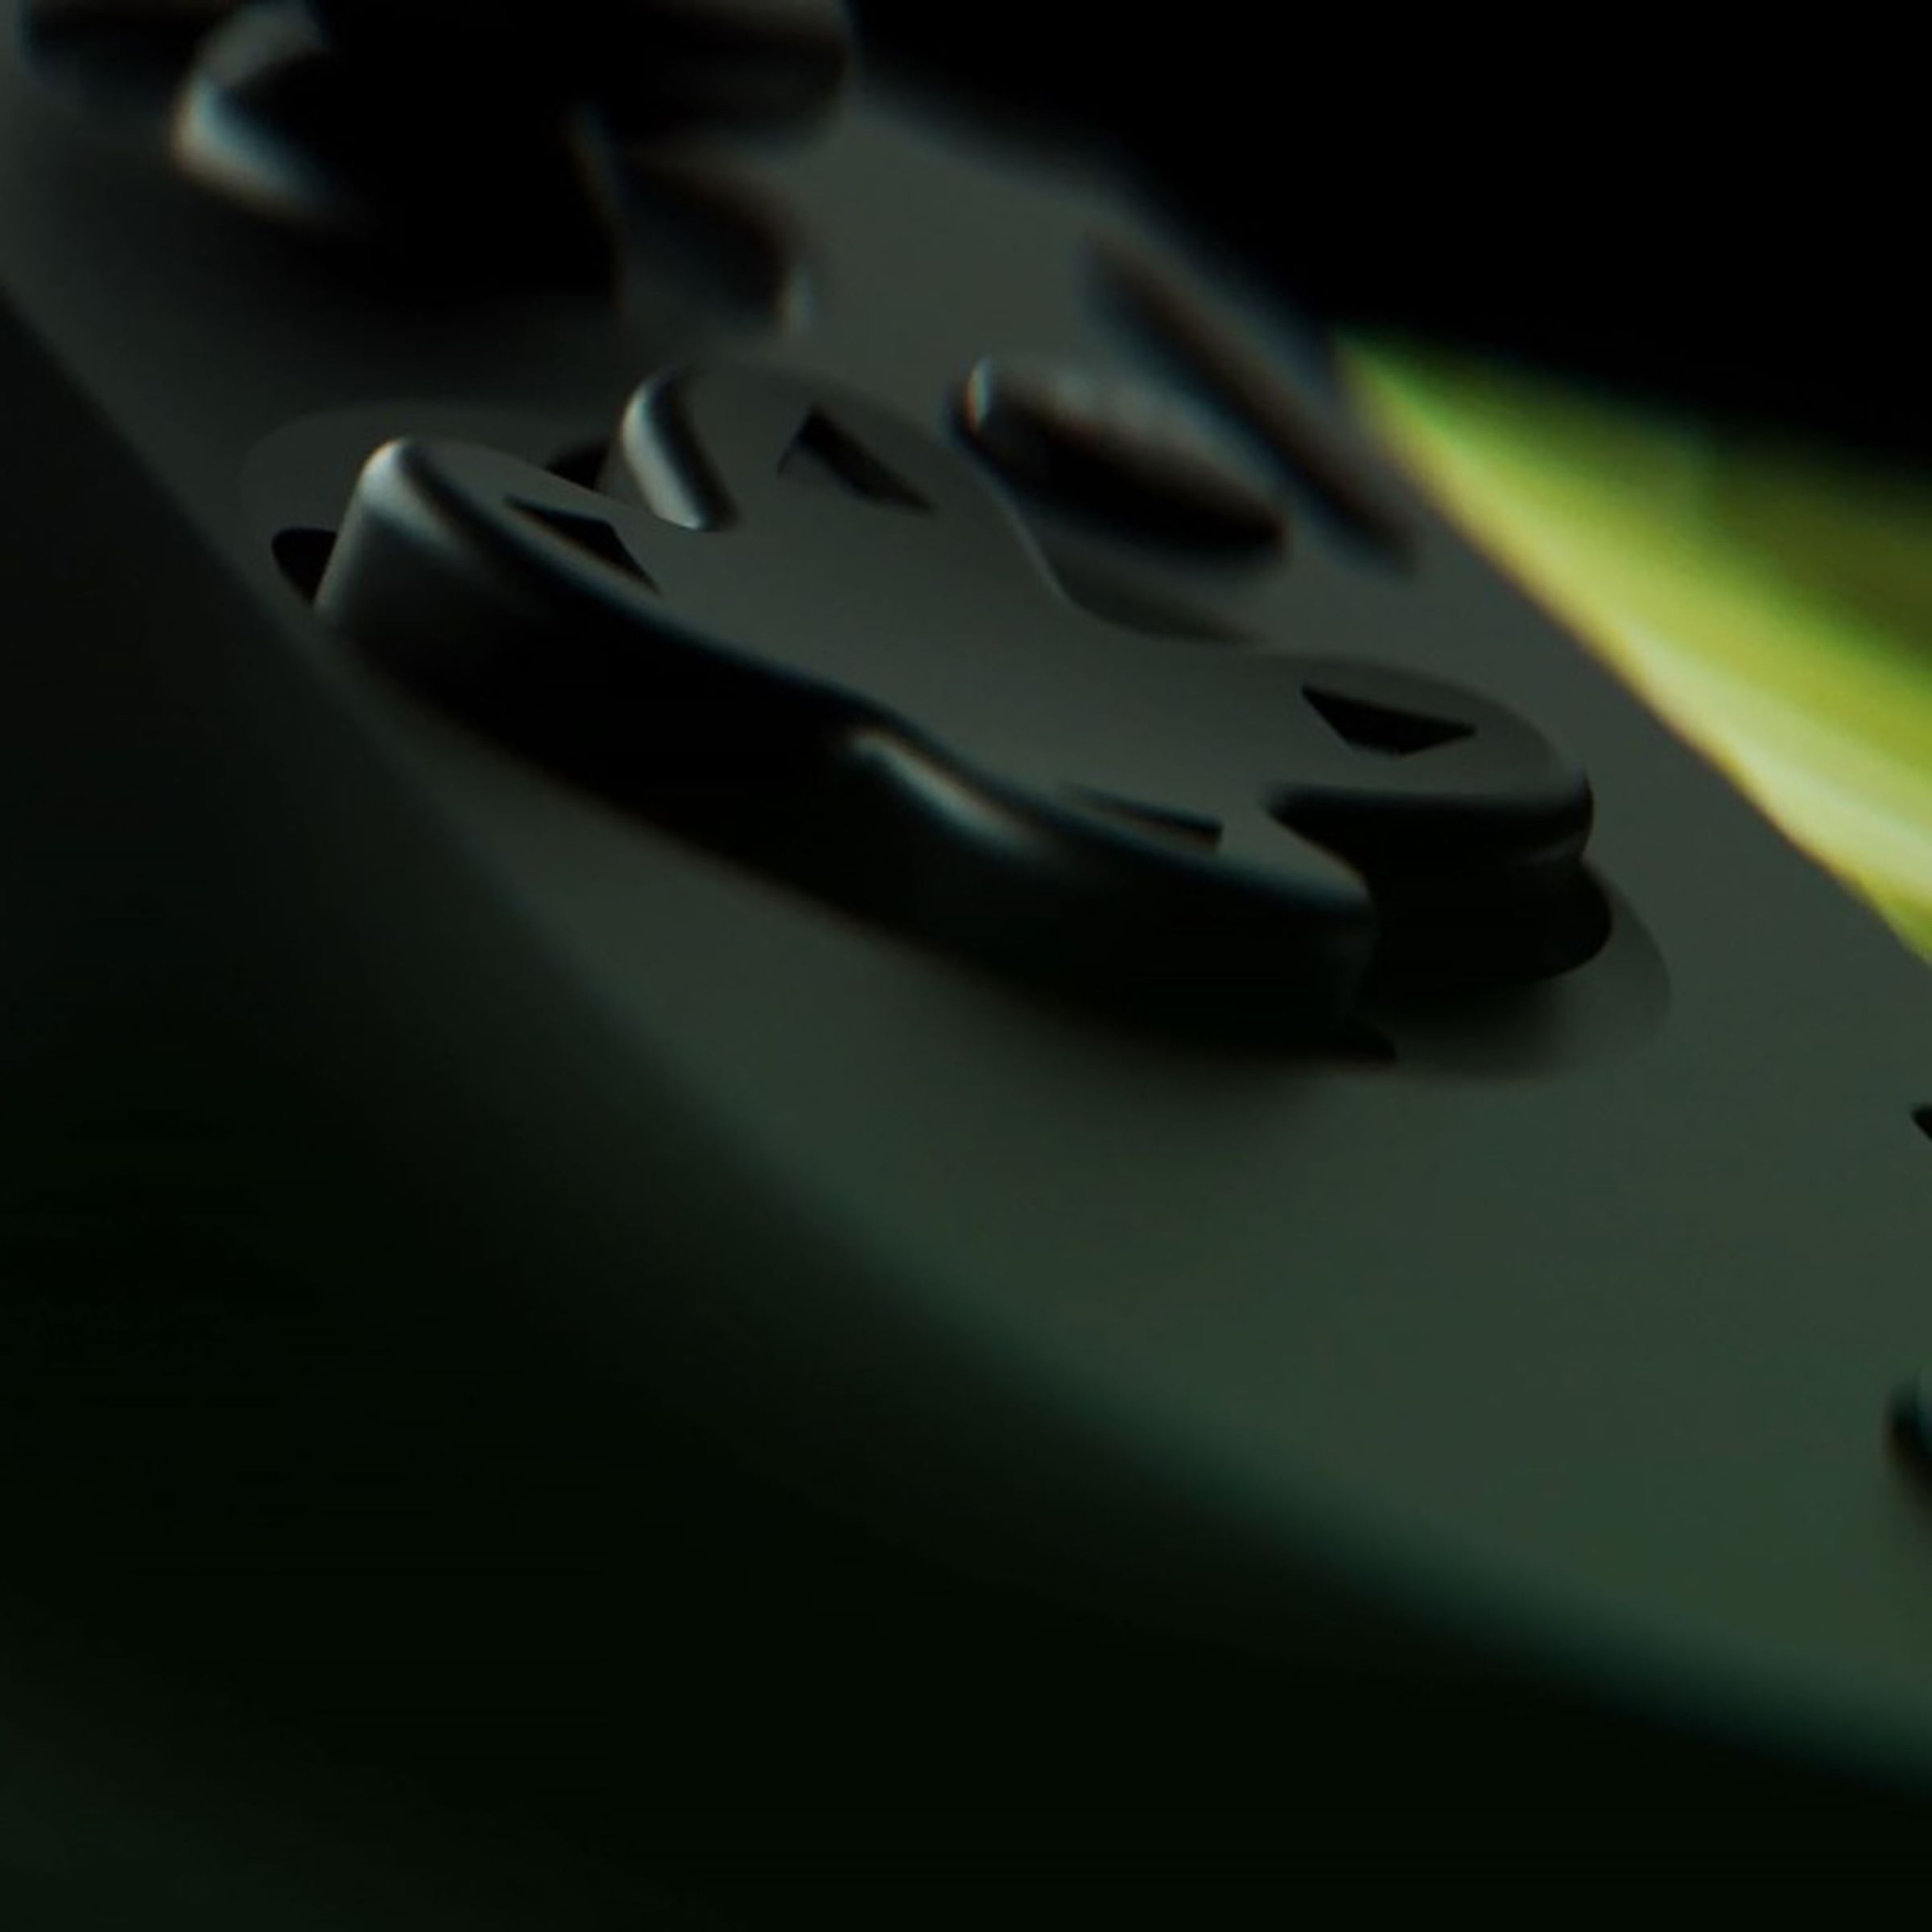 Close-up image of a d-pad, with a few buttons and a screen visible in the background.